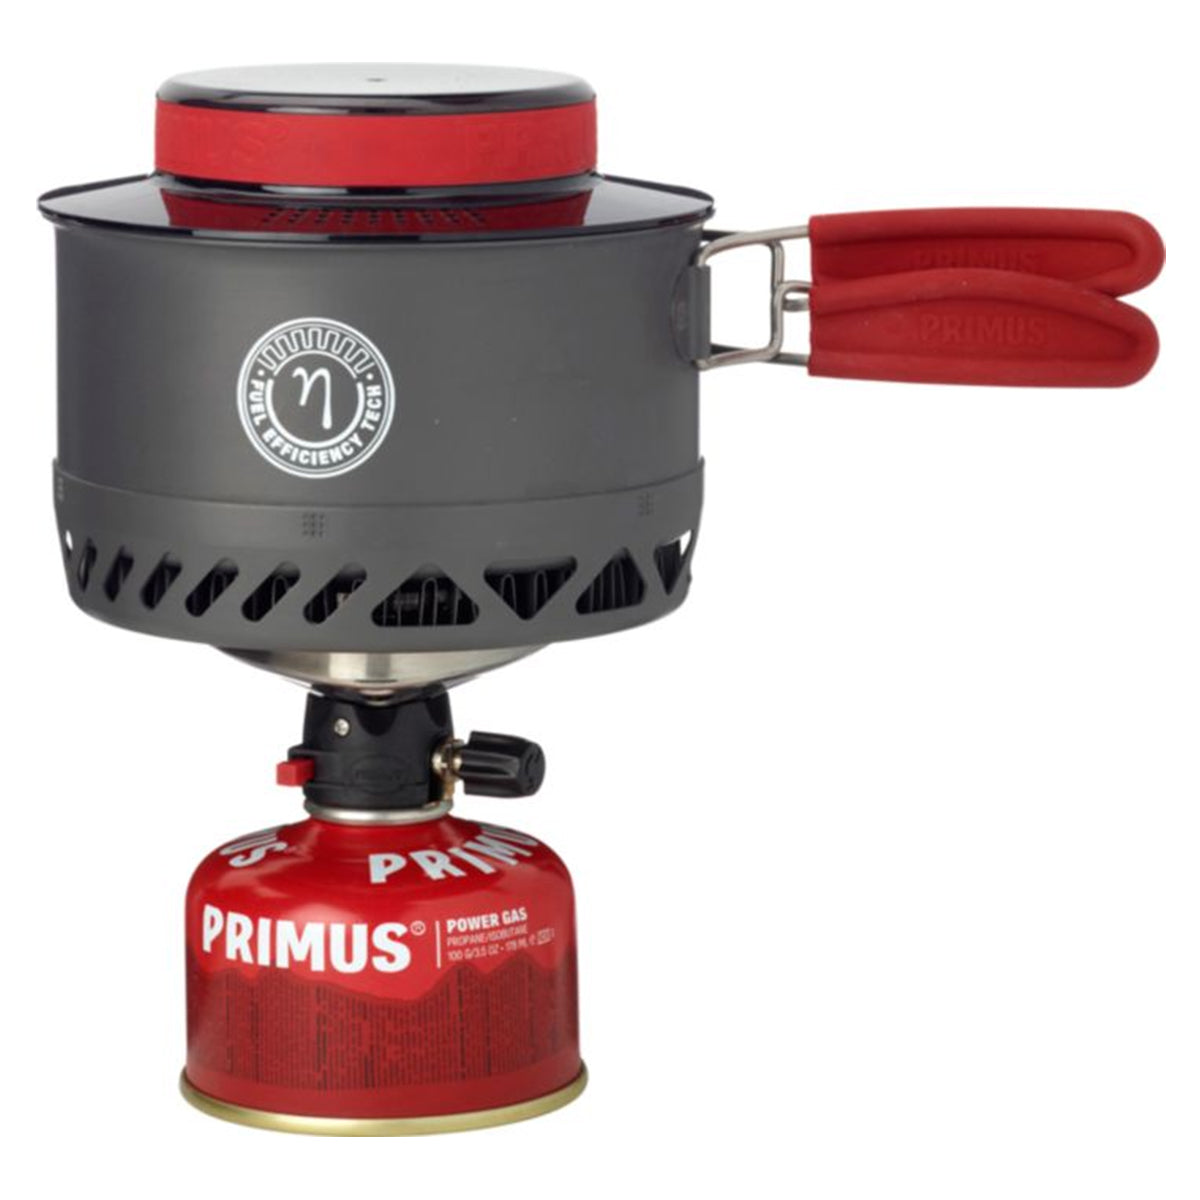 Primus Lite XL Stove System by Primus | Camping - goHUNT Shop